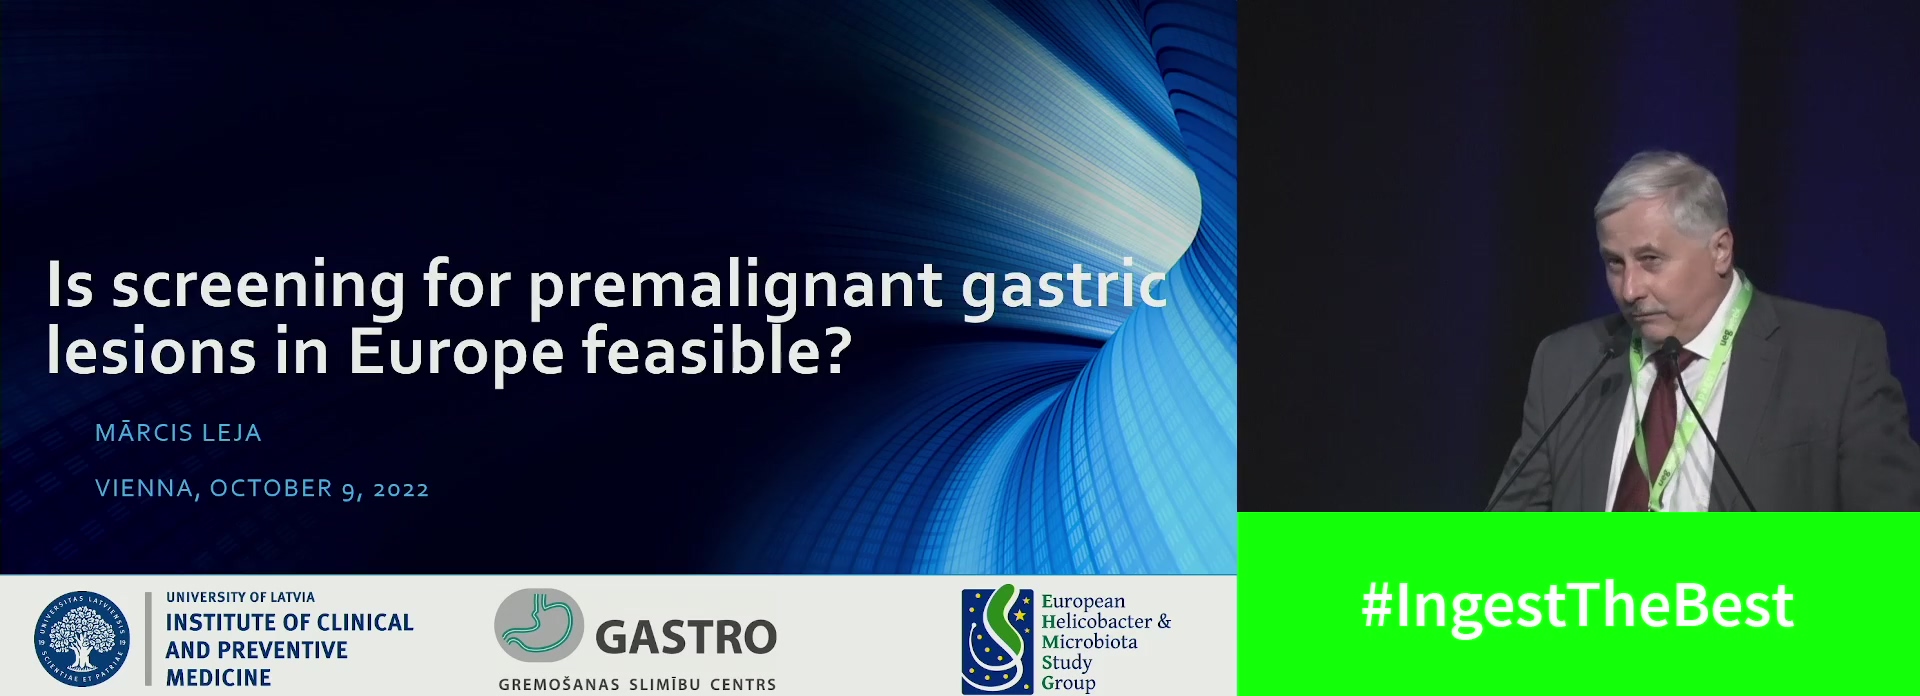 Is screening for premalignant gastric lesions in Europe feasable?